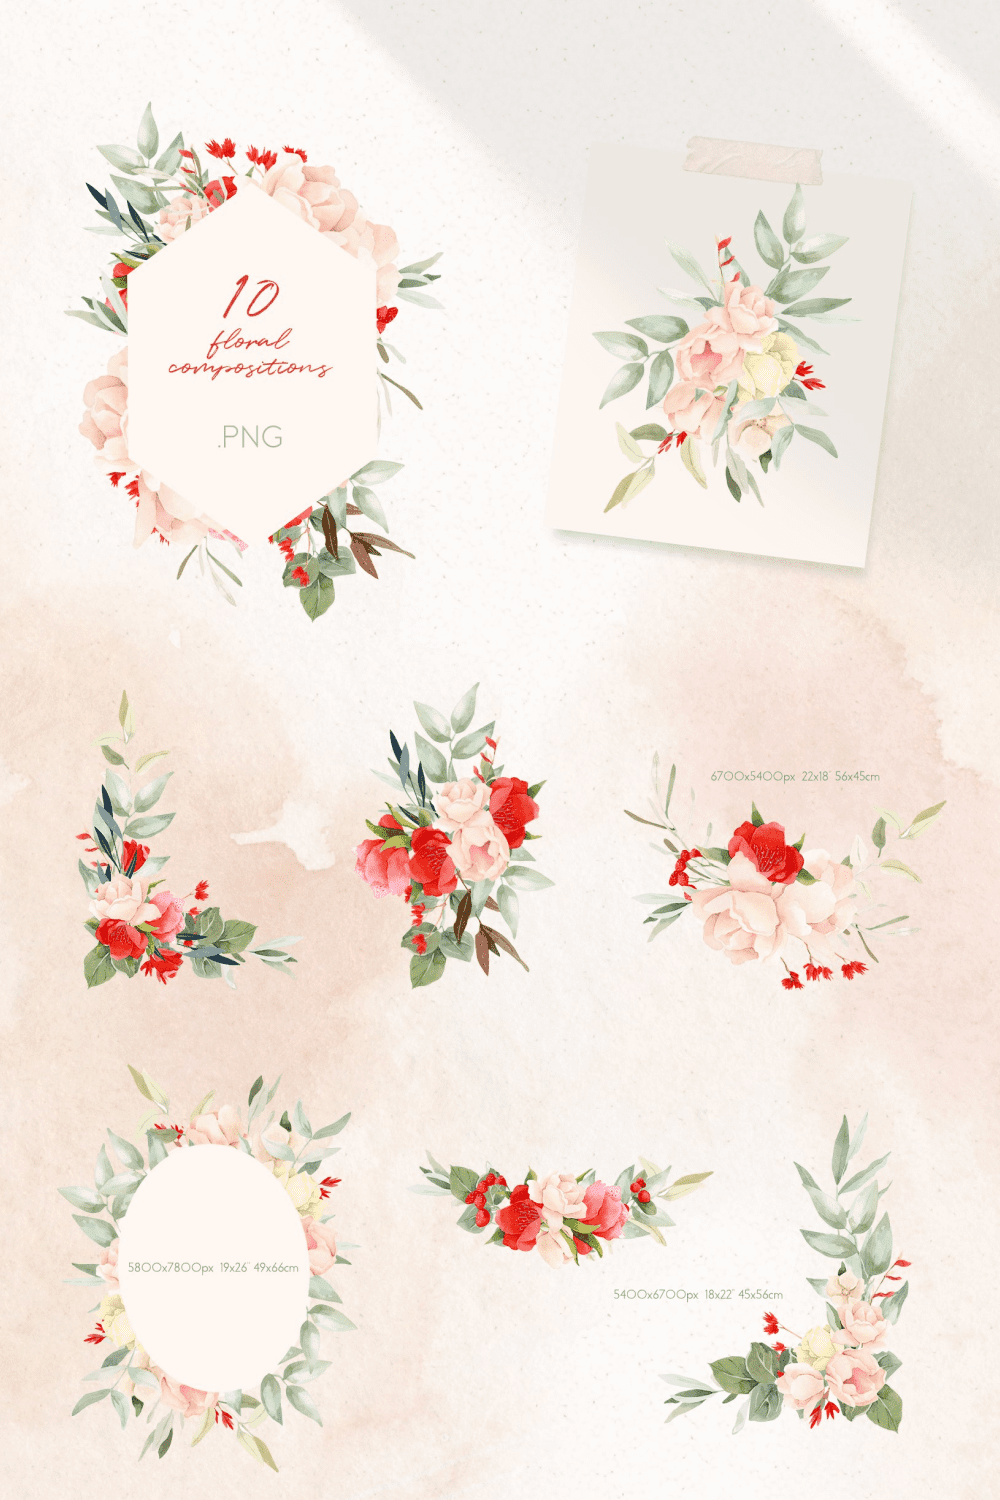 Nice cute template with flowers.